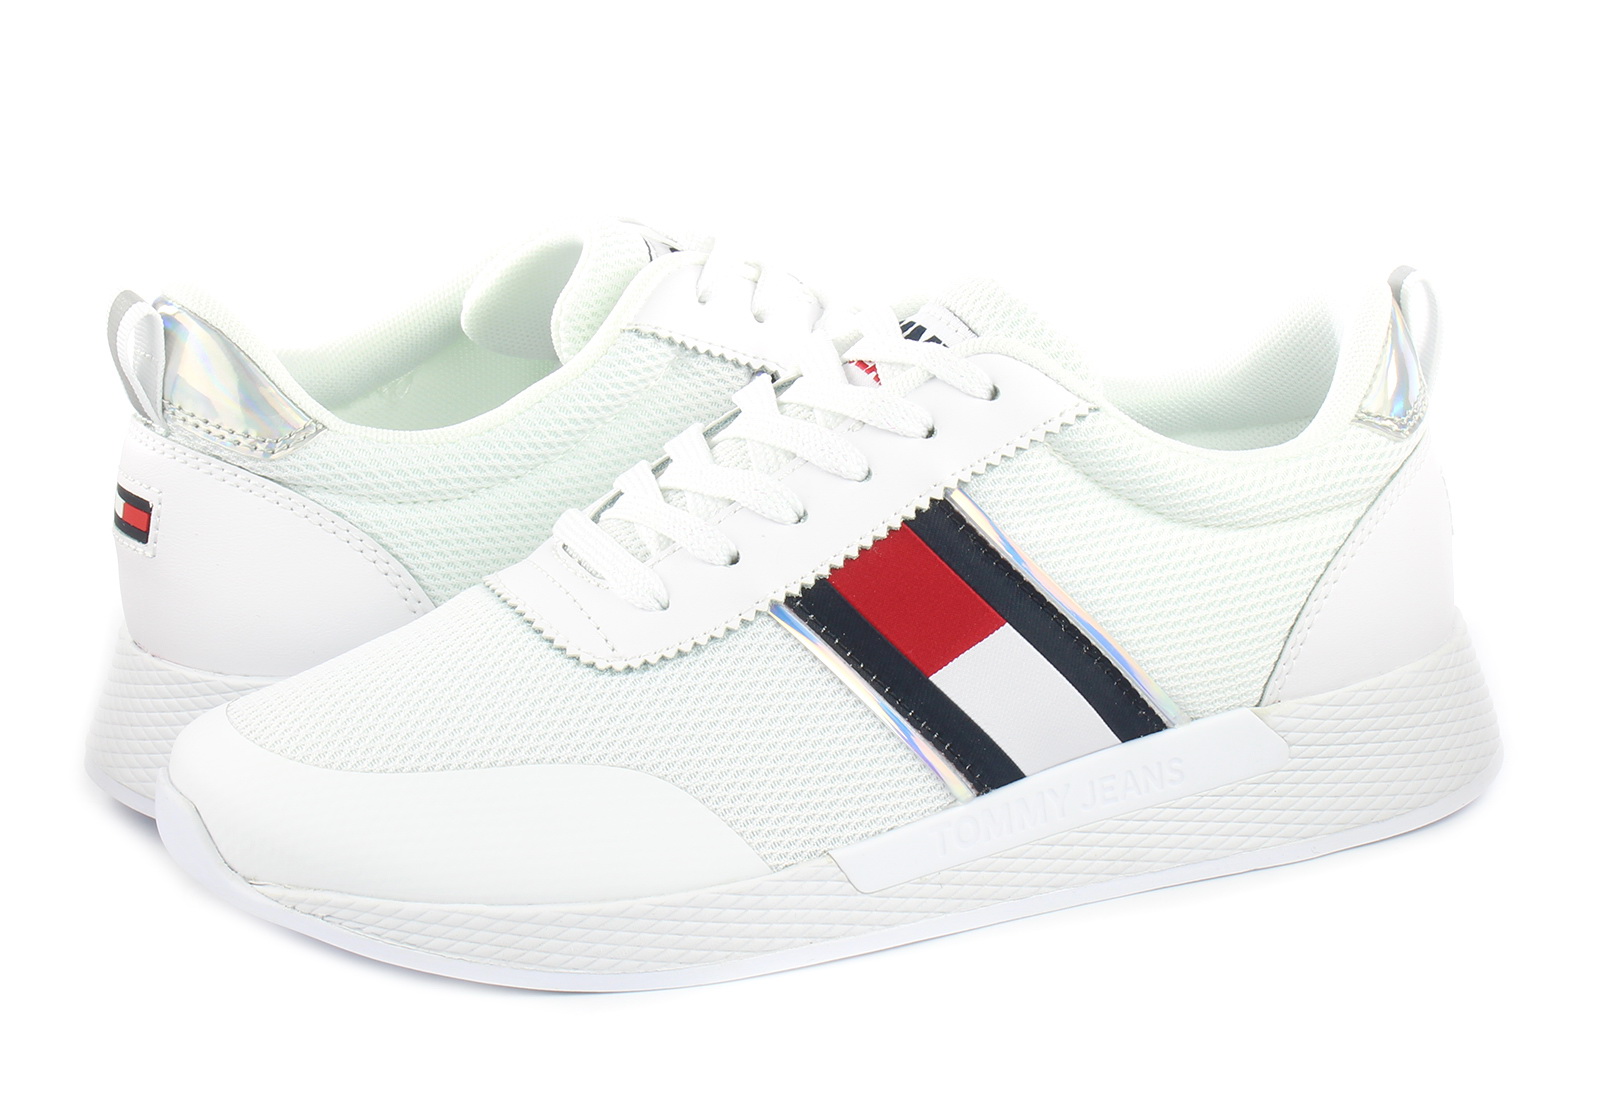 Ordliste ånd Give Tommy Hilfiger Sneakers - Lilly 13c3 - EN0-1359-YBR - Online shop for  sneakers, shoes and boots